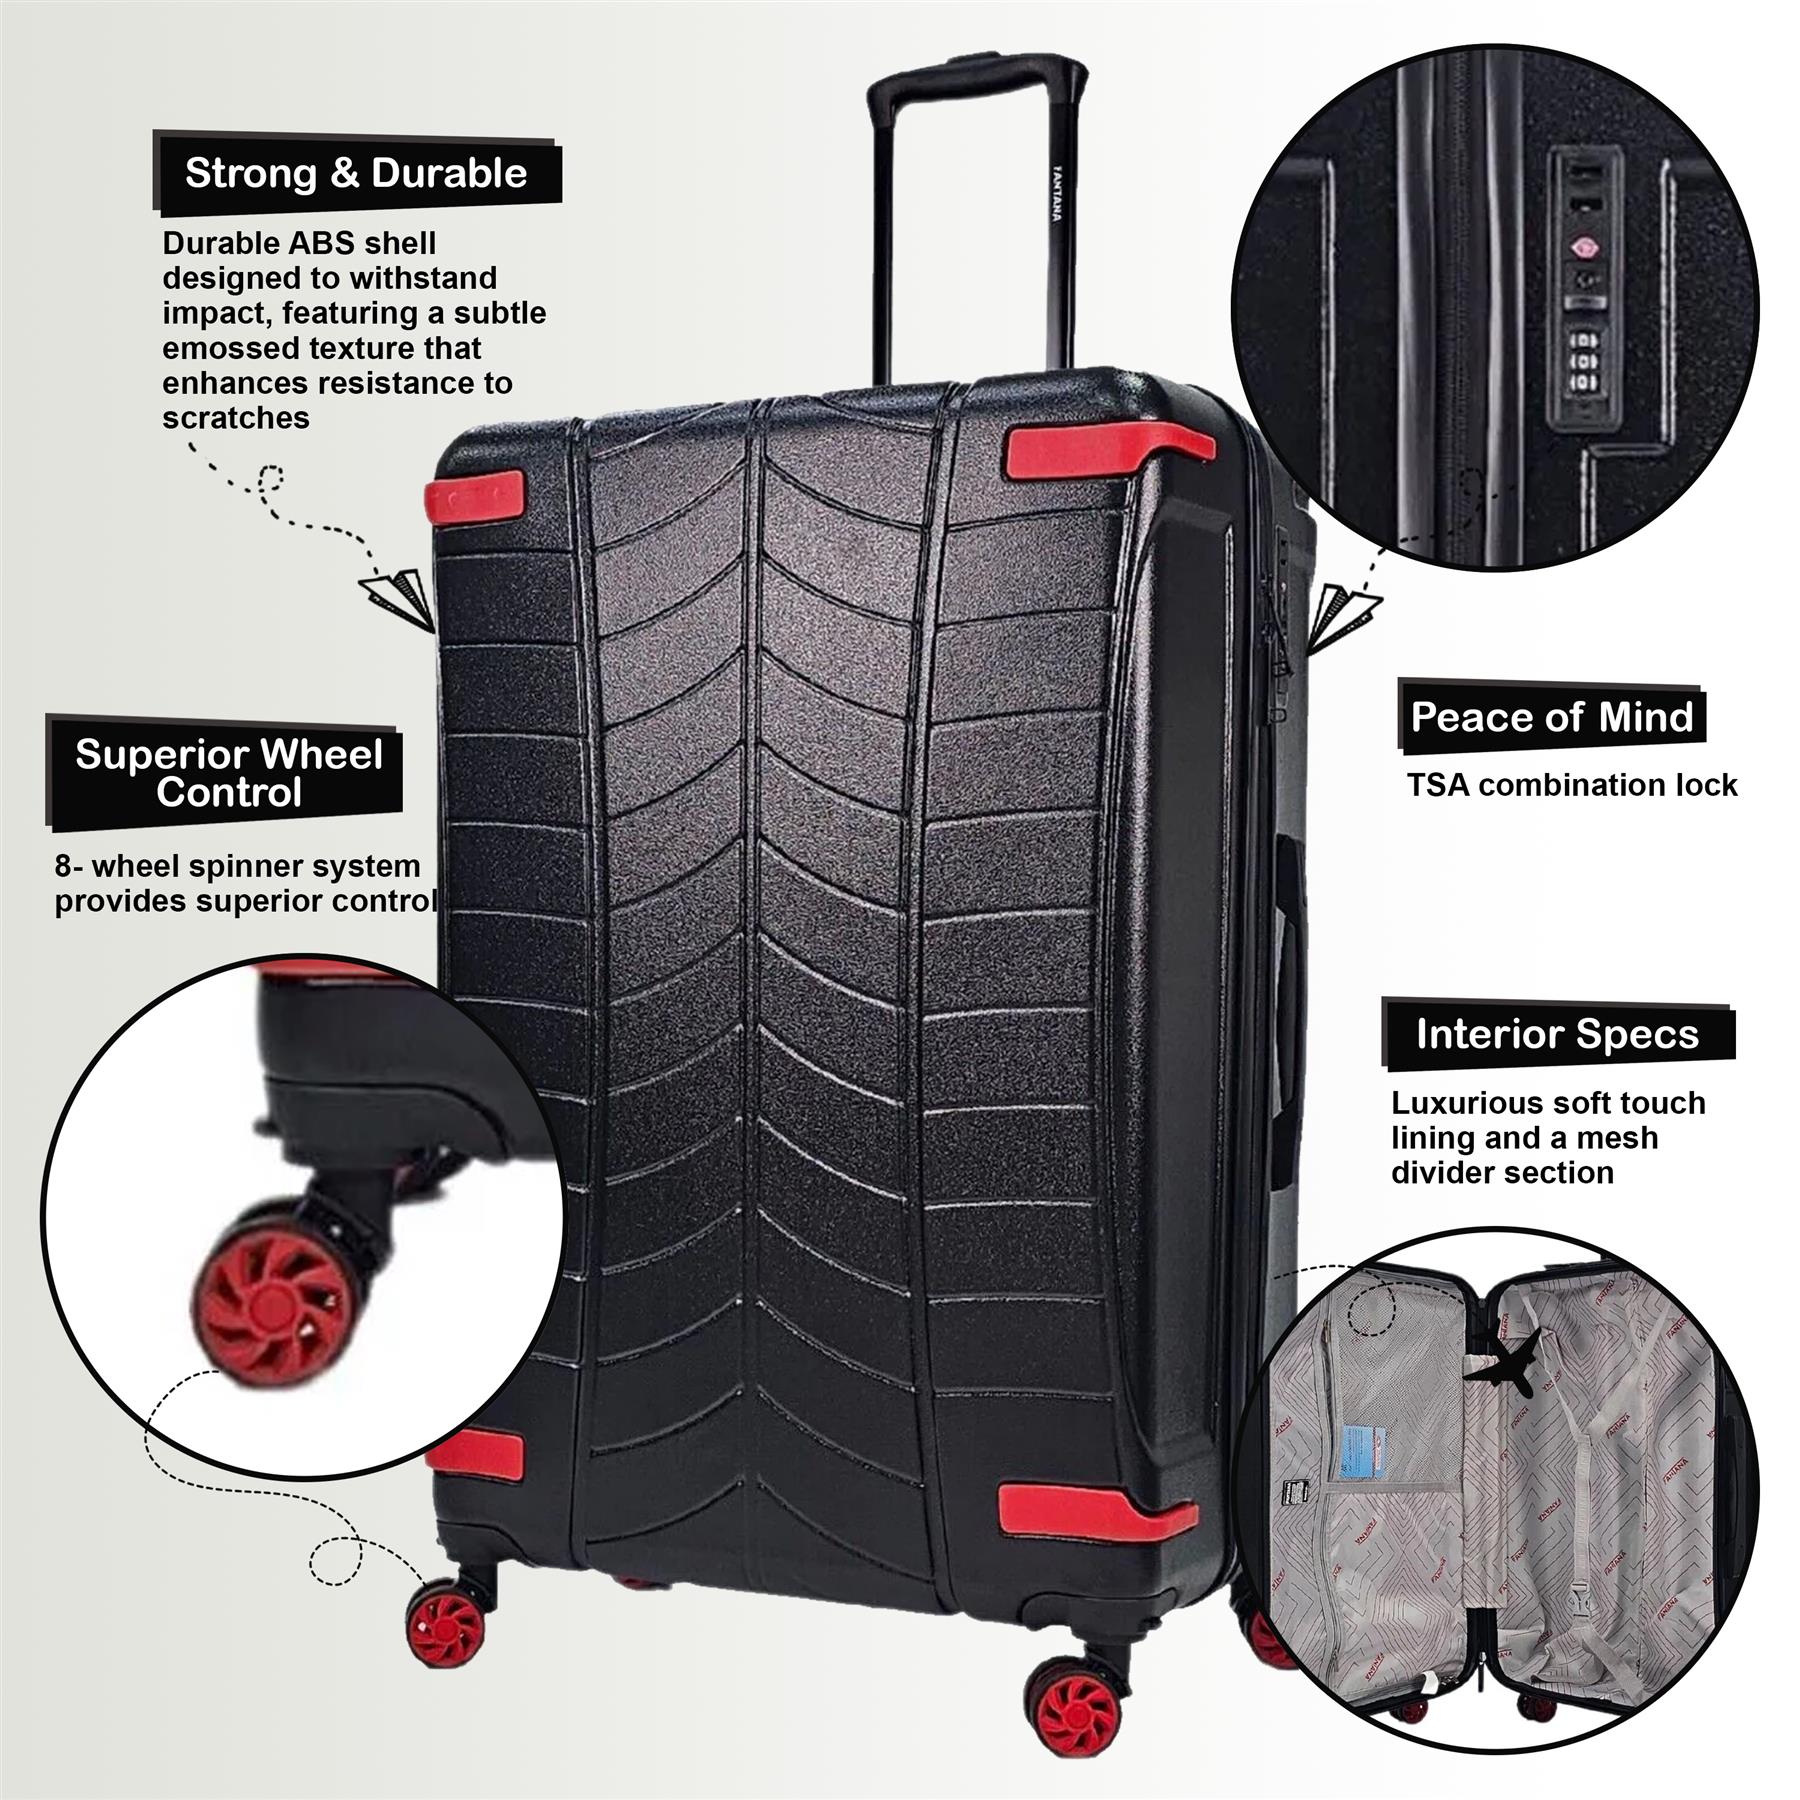 Bynum Large Hard Shell Suitcase in Black